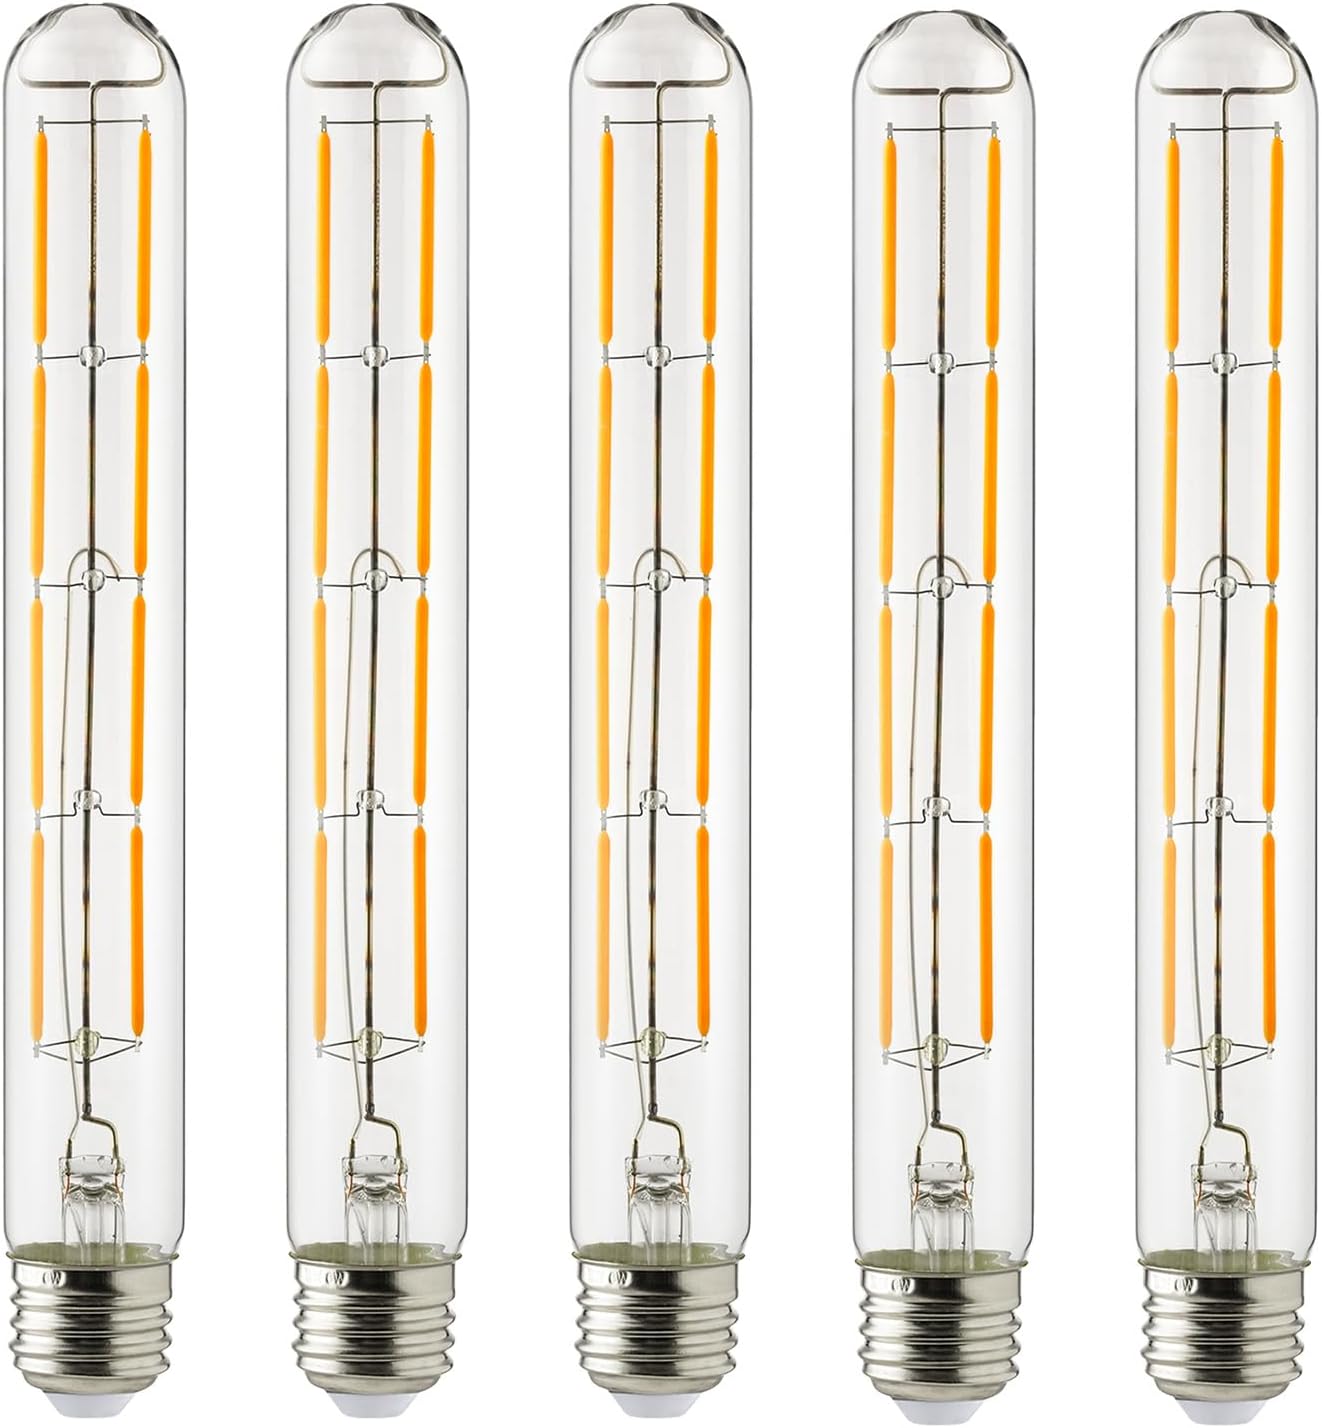 Sunlite 80621 LED Filament T10 Tubular Light Bulb, 6 Watts (60W Equivalent), 570 Lumens, Medium E26 Base, 120 Volts, Dimmable, 90 CRI, UL Listed, Clear, Title-20 Compliant, 2700K Soft White - 5 Pack